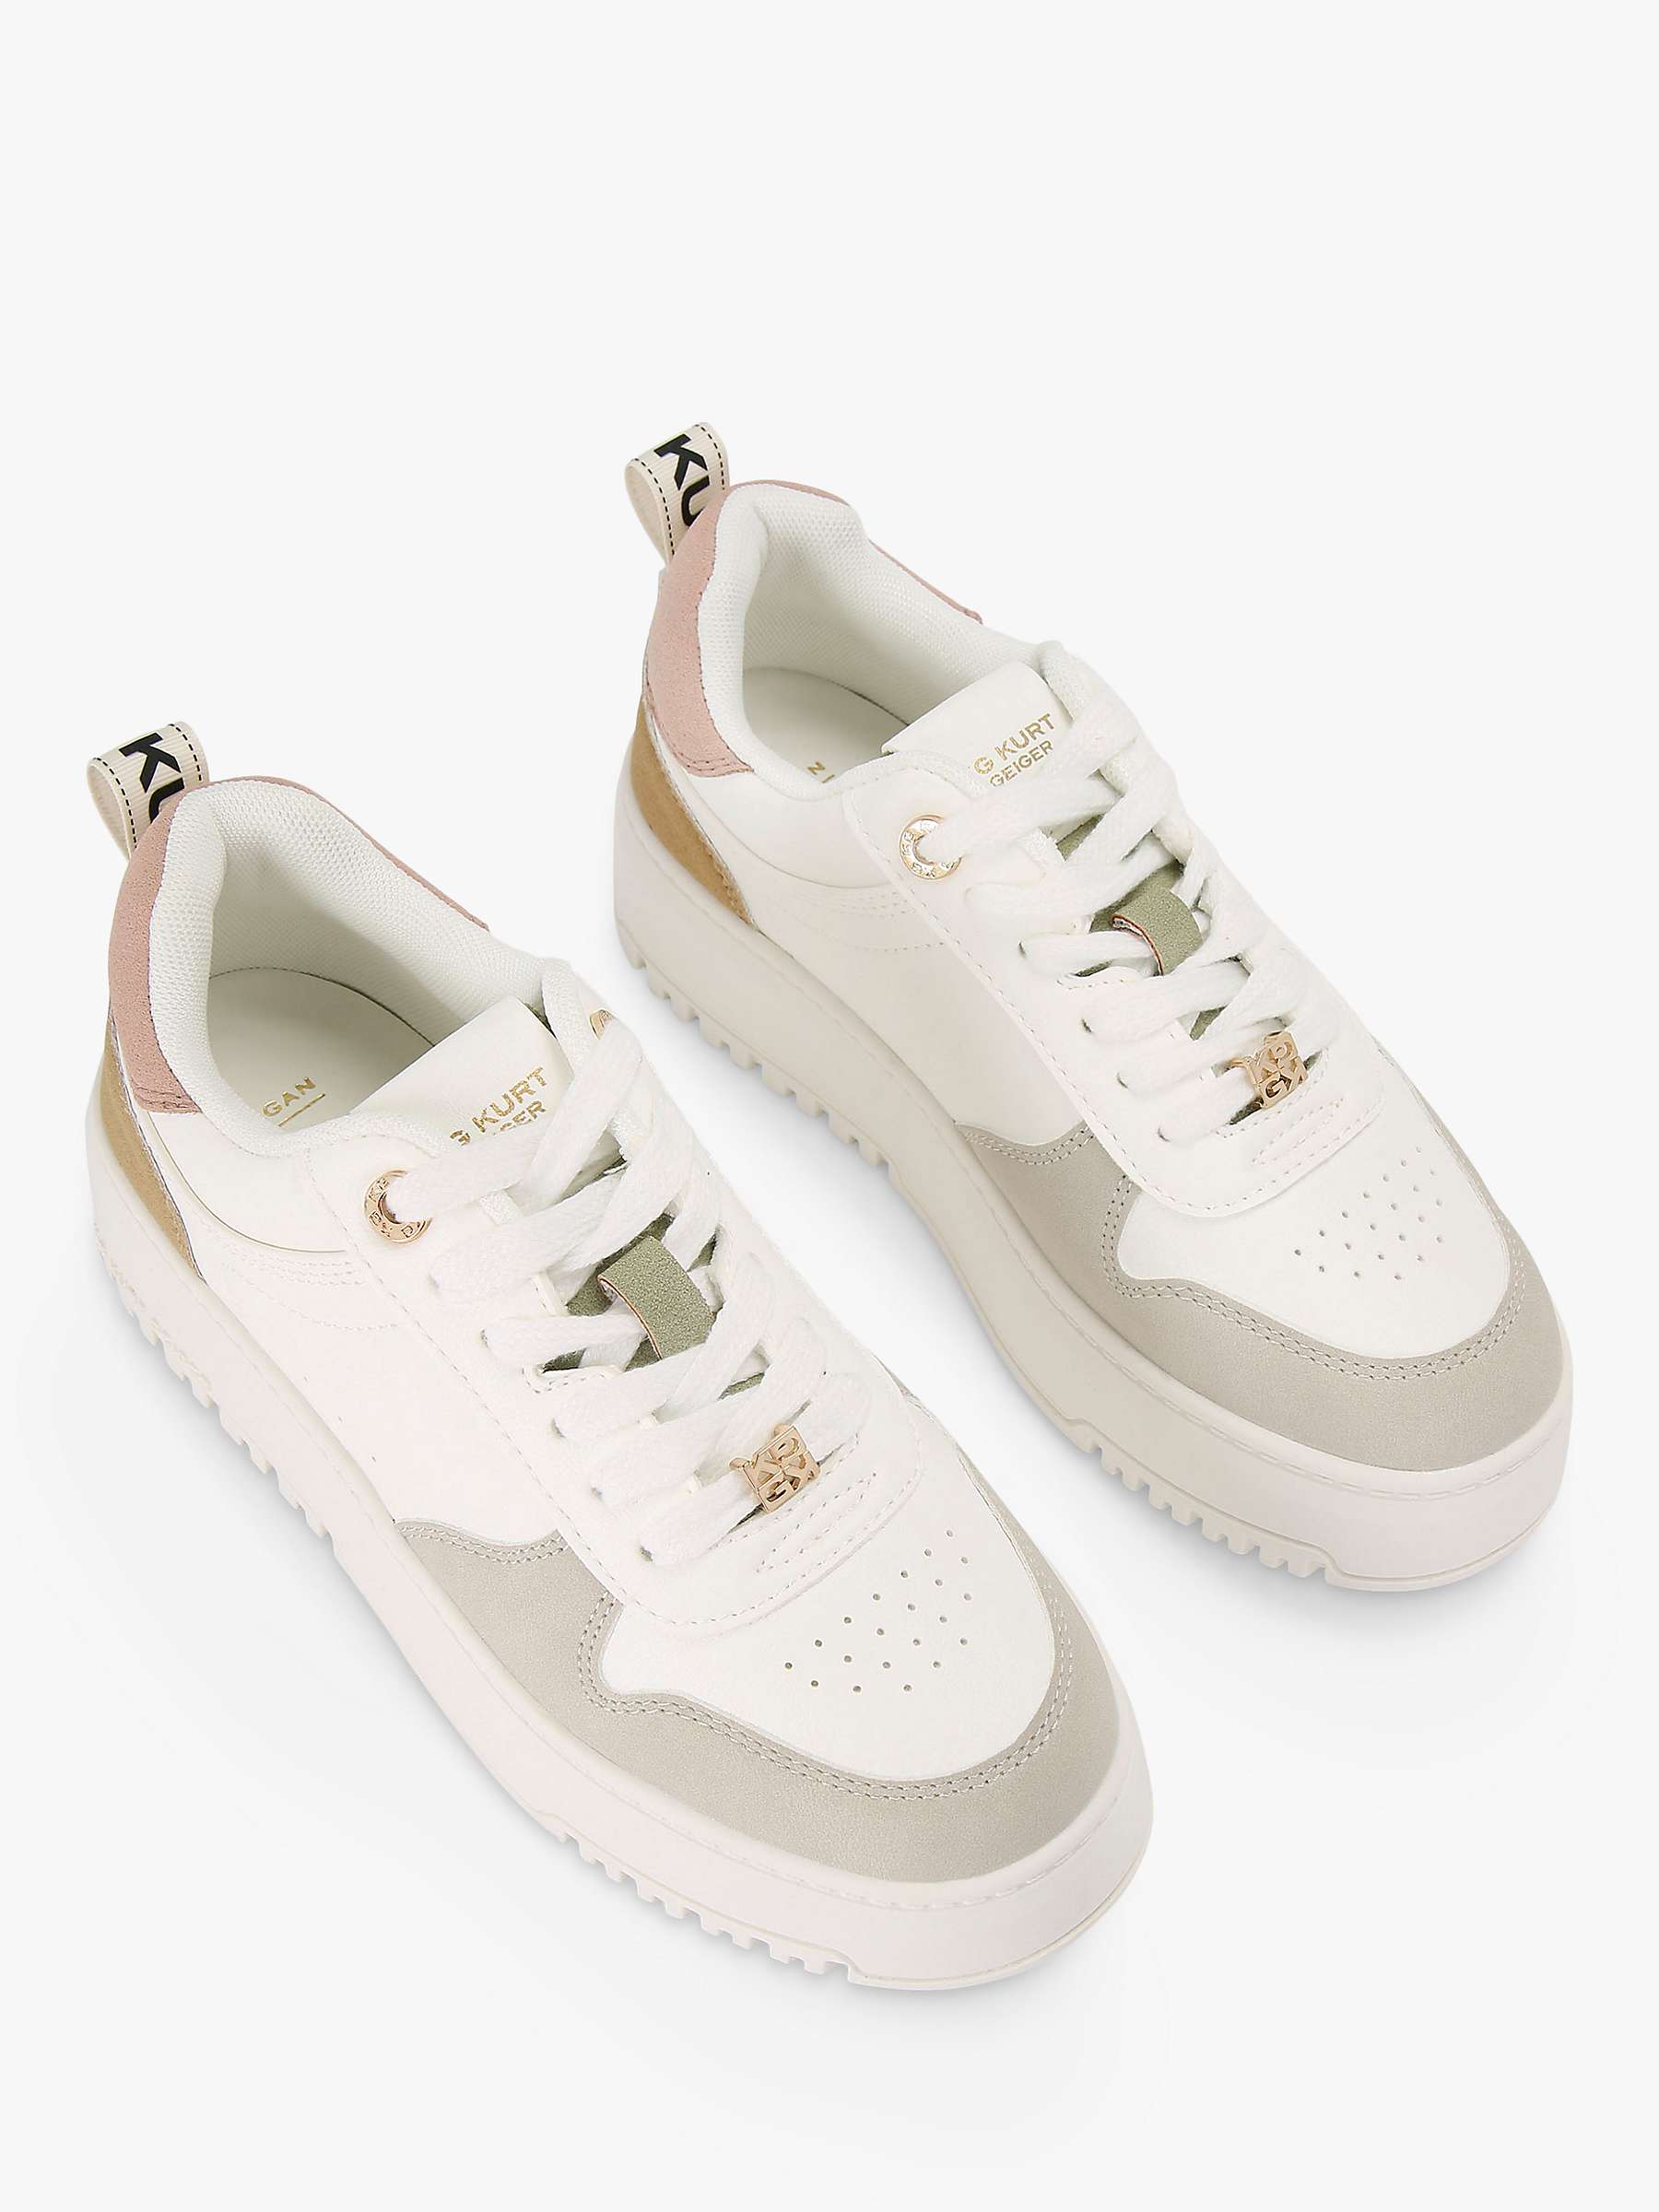 Buy KG Kurt Geiger Lana Chunky Lace Up Trainers, Taupe/Multi Online at johnlewis.com